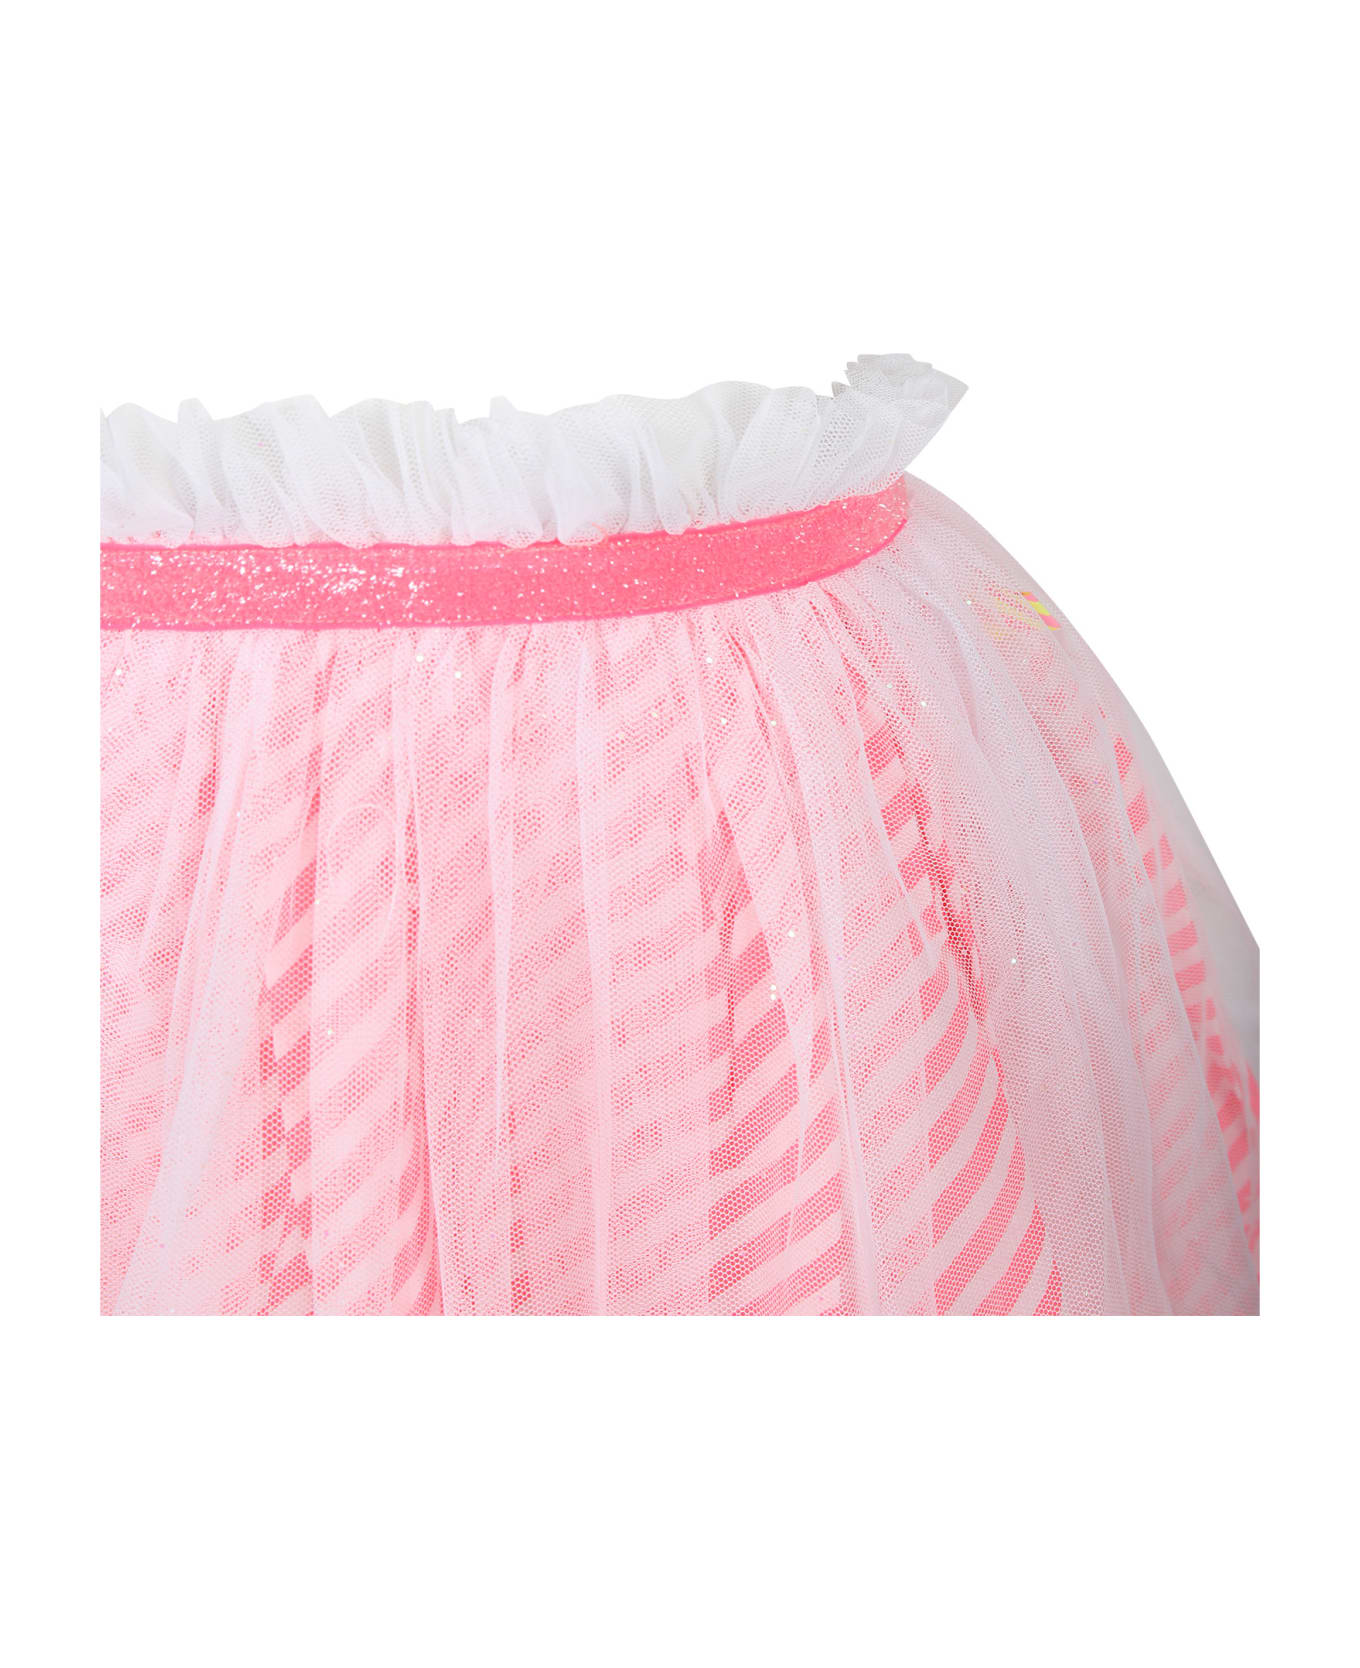 Billieblush White Skirt For Girl With Pattern - Pink ボトムス